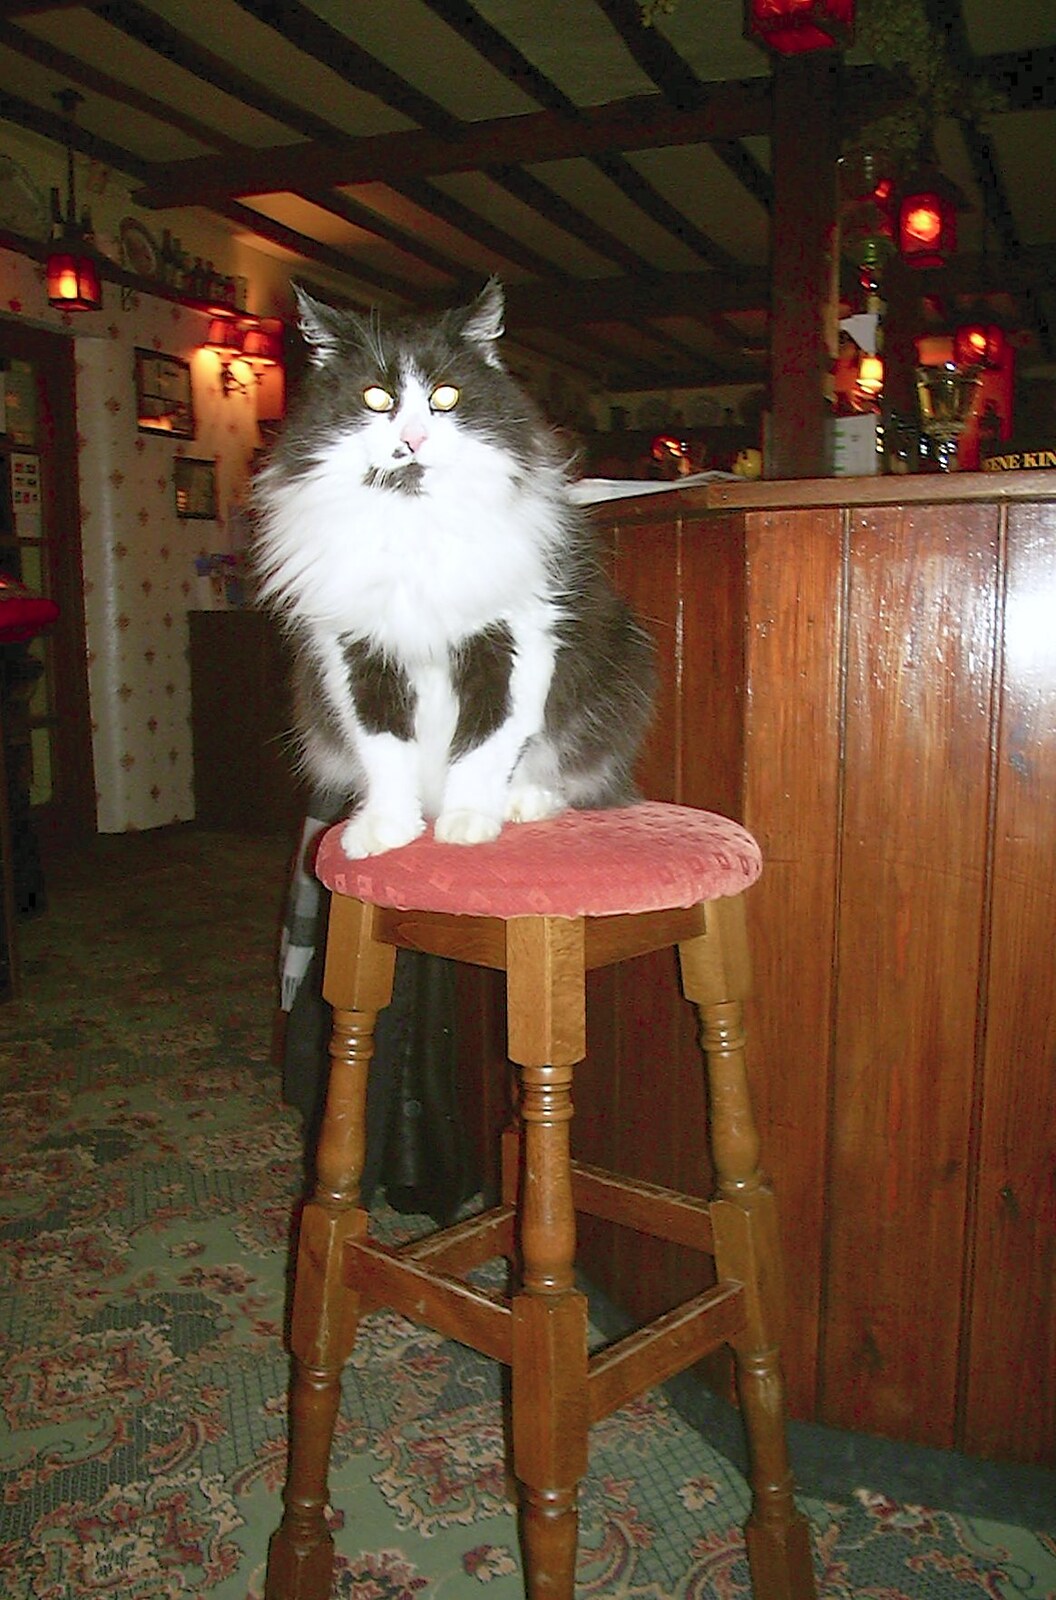 Vimto the cat perches on a bar stool from The Swan's Cellar, and Bill's Mambo Night at the Barrel, Banham, Norfolk - 6th February 2004